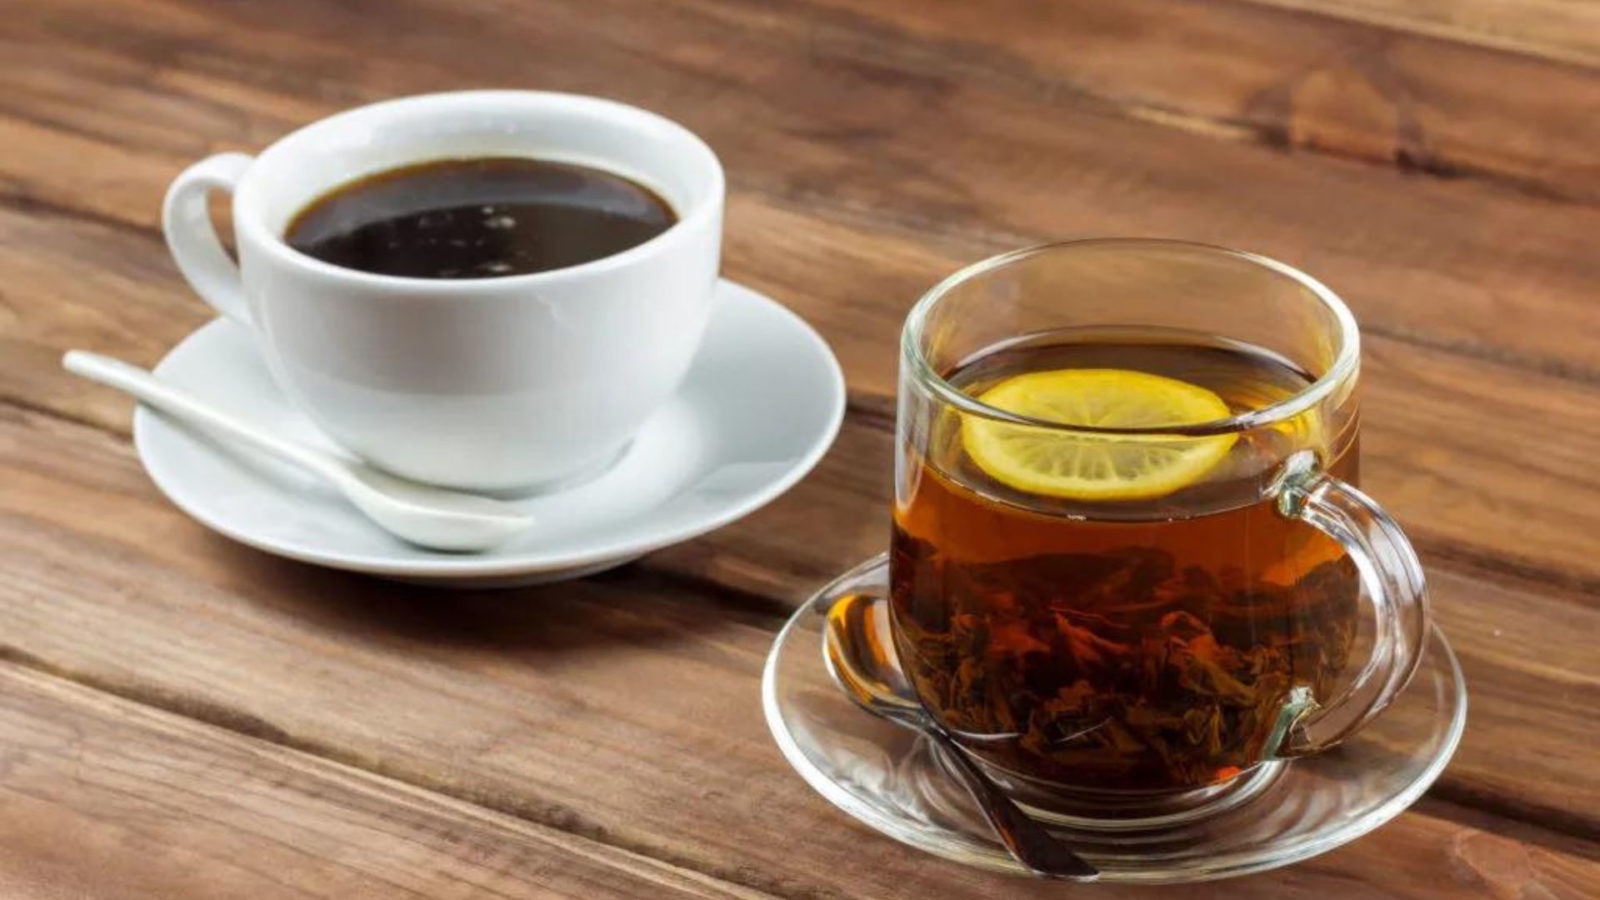 Tea vs Coffee: Which one is better for your health?